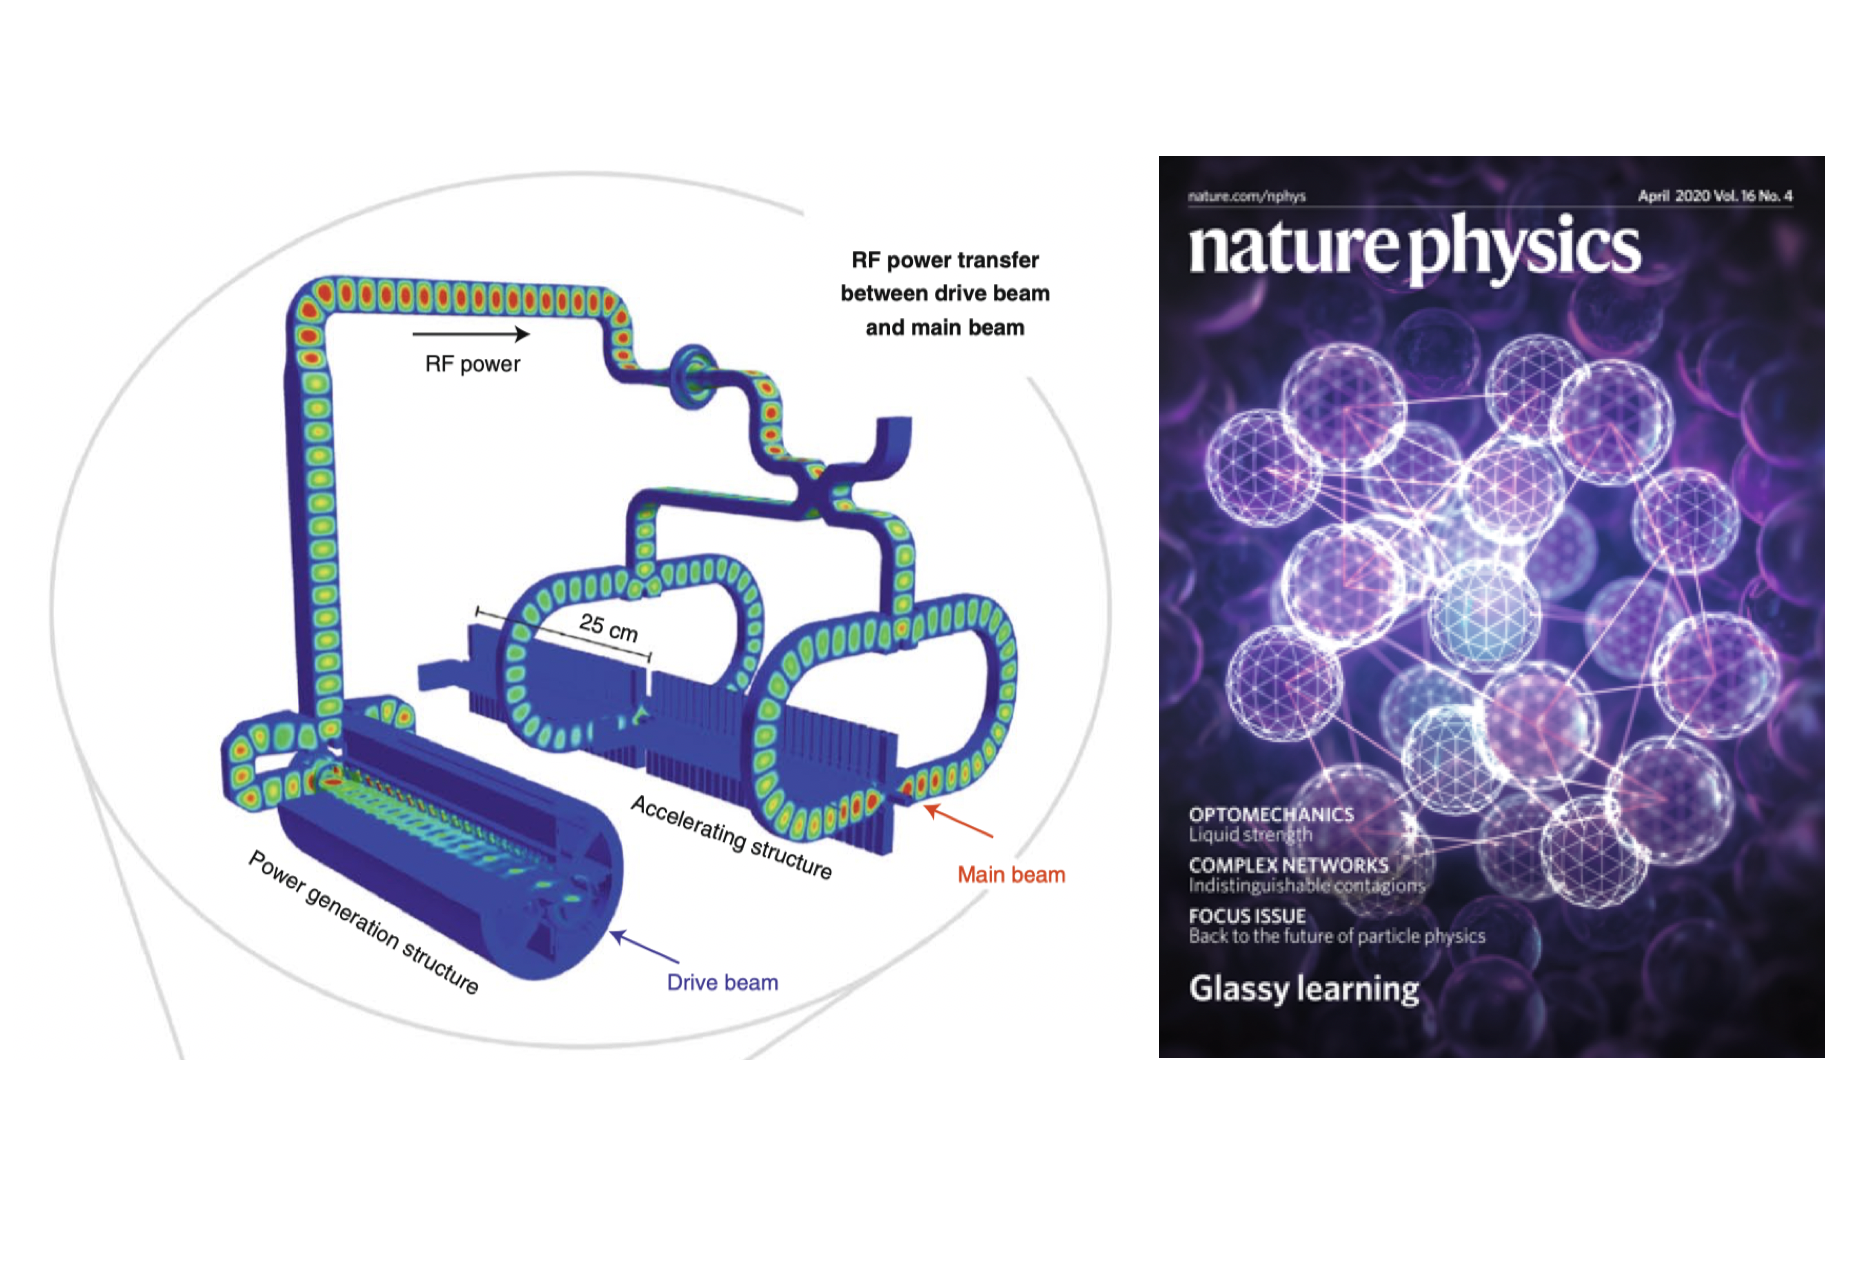 CLIC image in Nature Physics April 2020 article